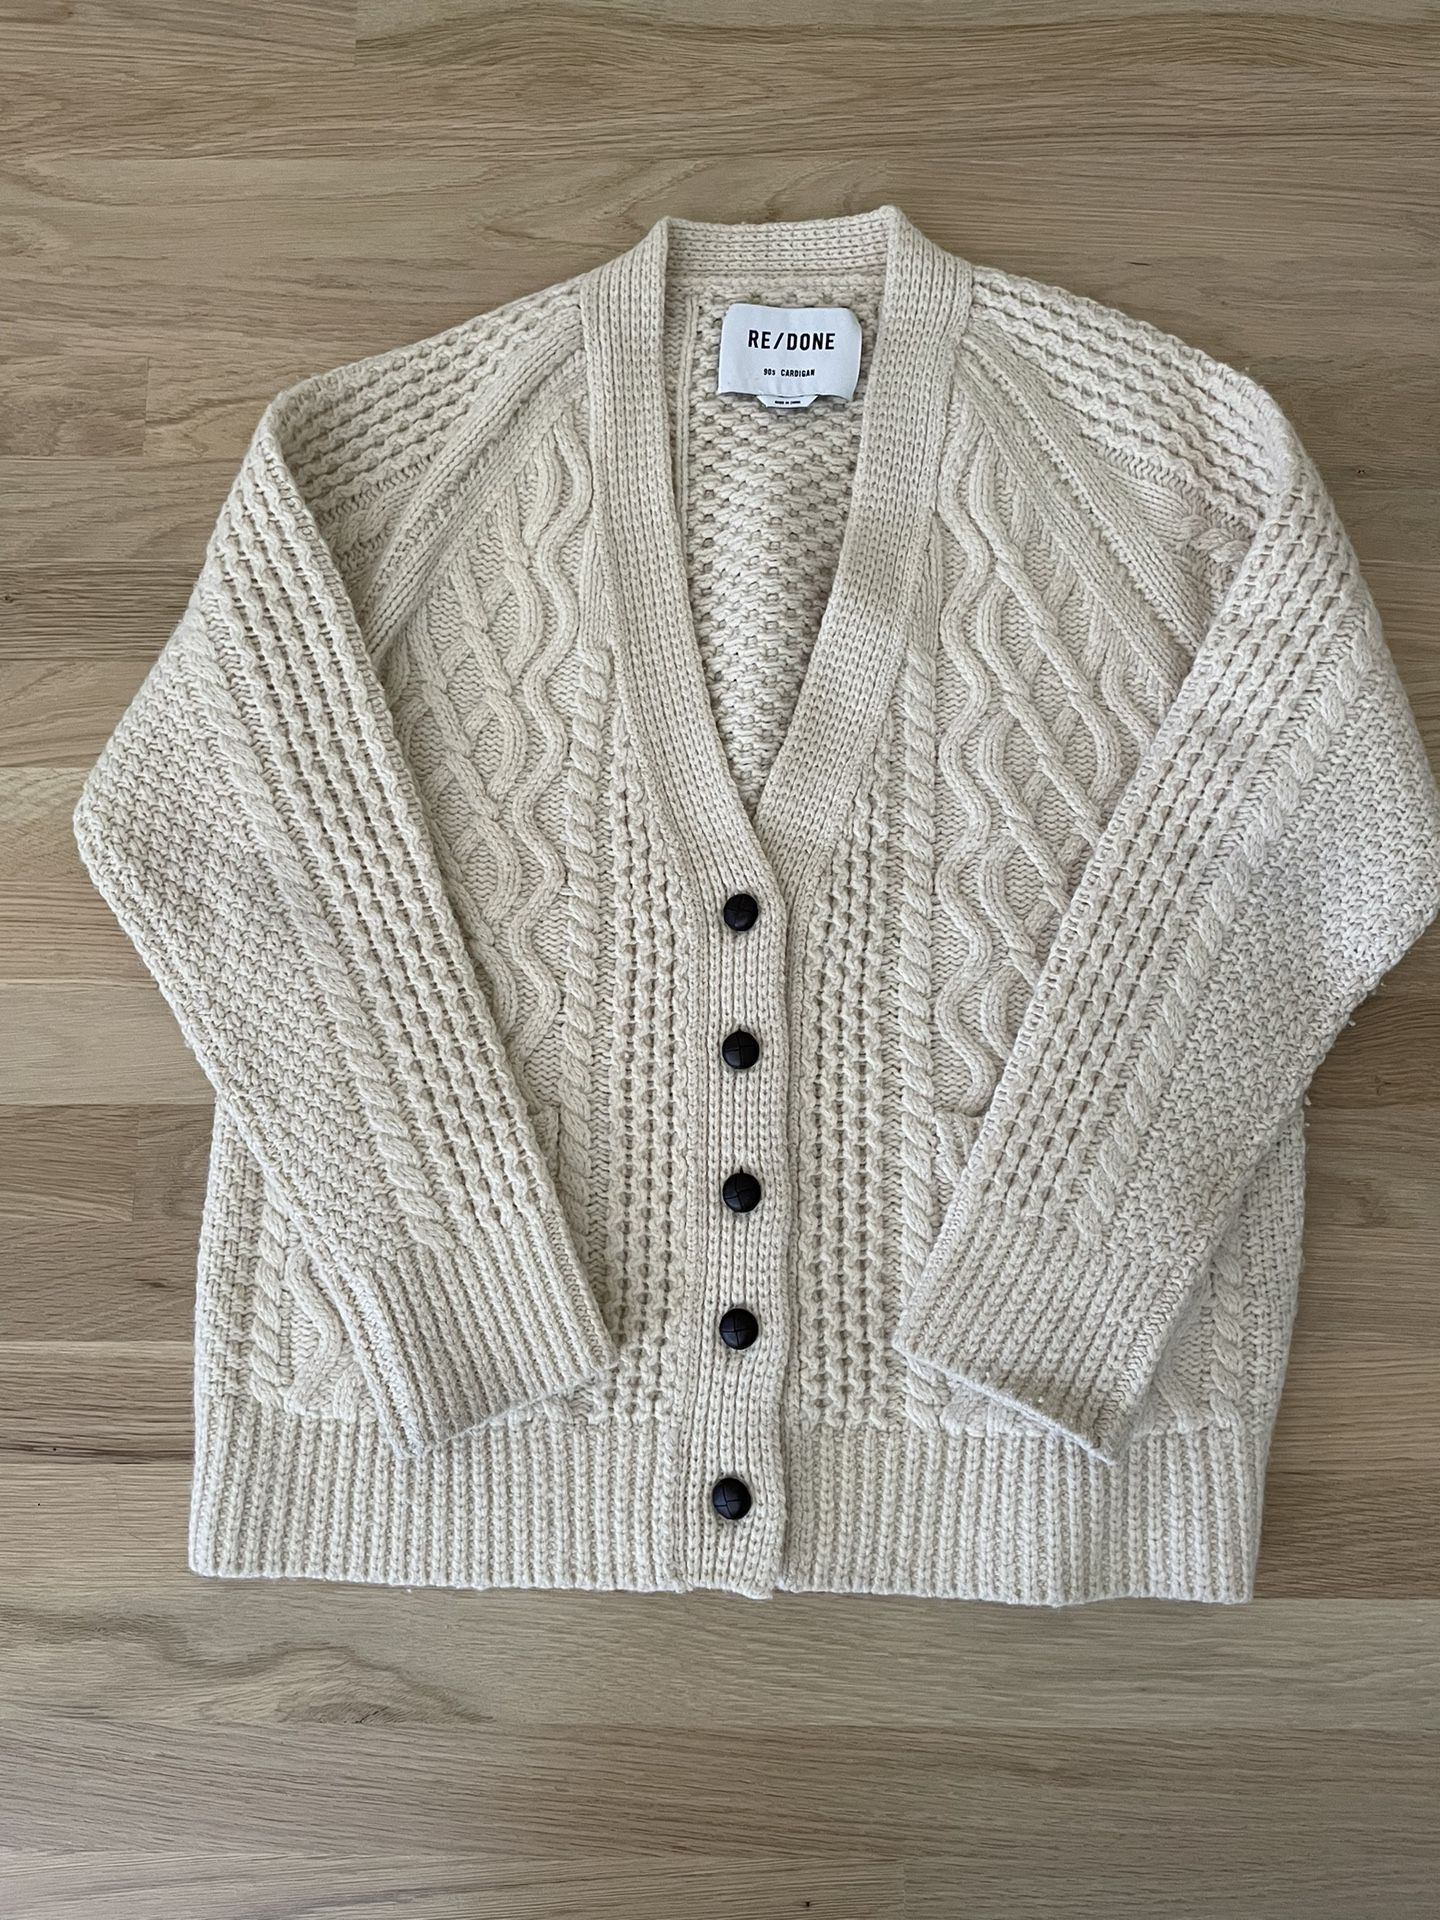 Re/done 90s Beige Natural 100% Wool Cardigan Size S